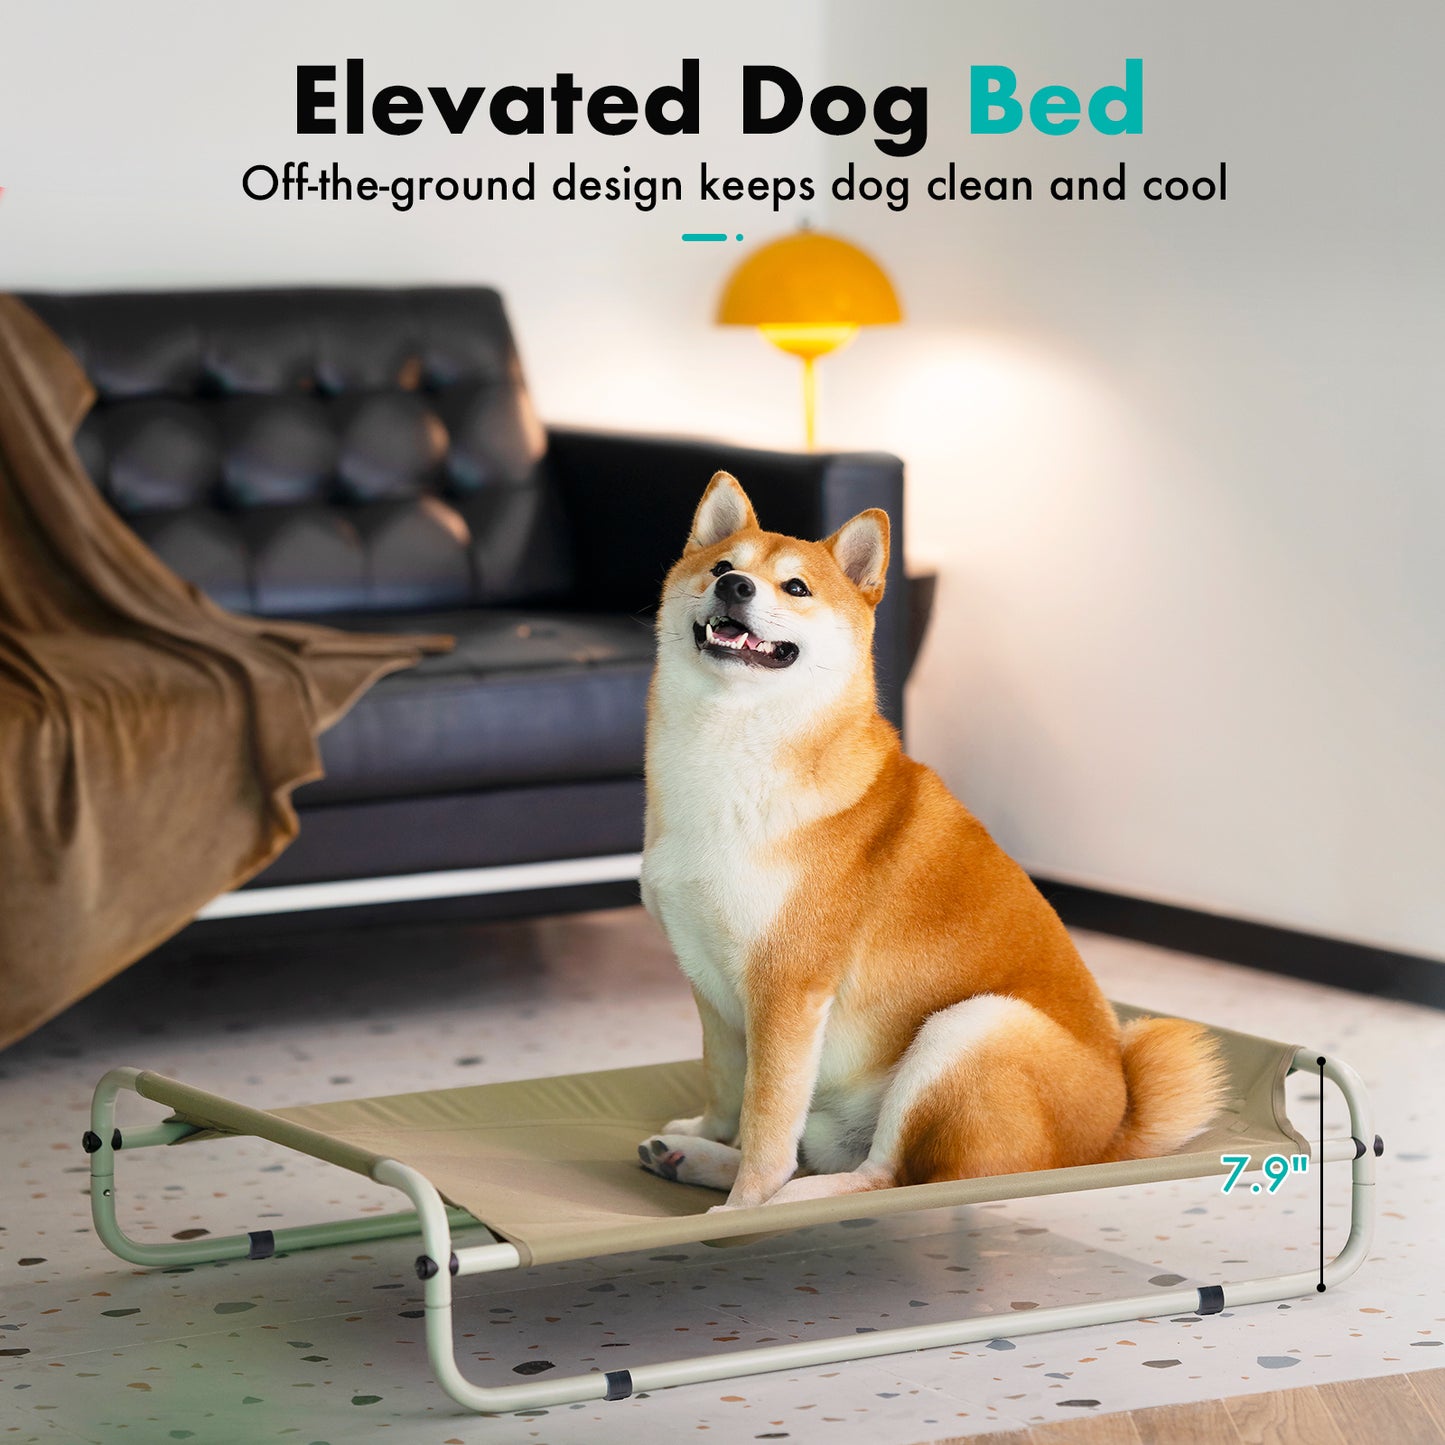 35" Elevated Pet Bed